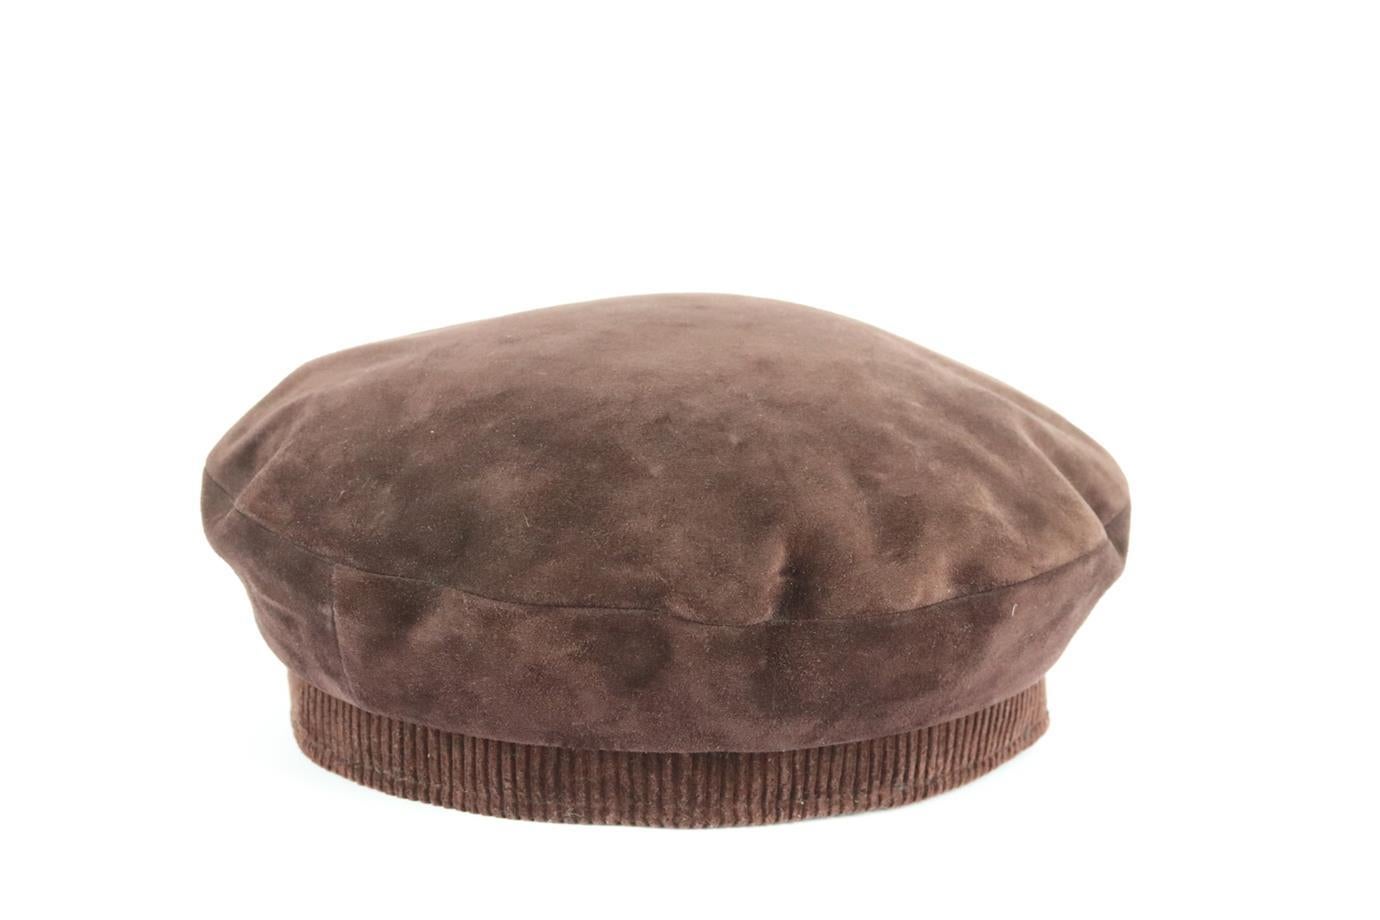 Hermès vintage corduroy trimmed suede beret. Brown. Pull on. 100% Calfskin; trim: 90% cotton, 10% cashmere; lining: 100% acetate. Size: Medium. Circumference: 22 in. Very good condition - No sign of wear; see pictures.